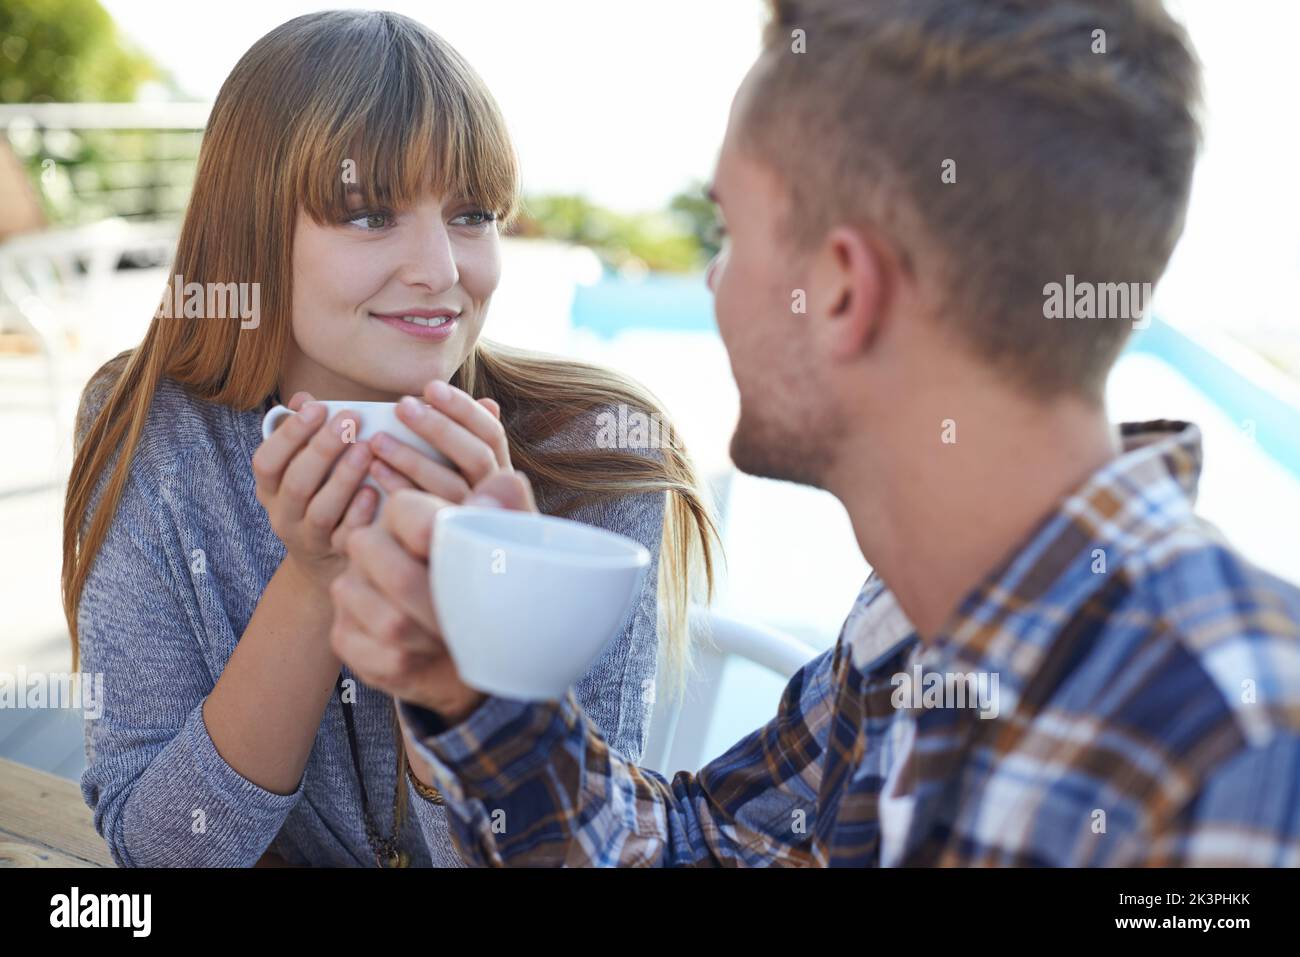 The perfect way to start the day is with you. A young couple enjoying breakfast outside. Stock Photo